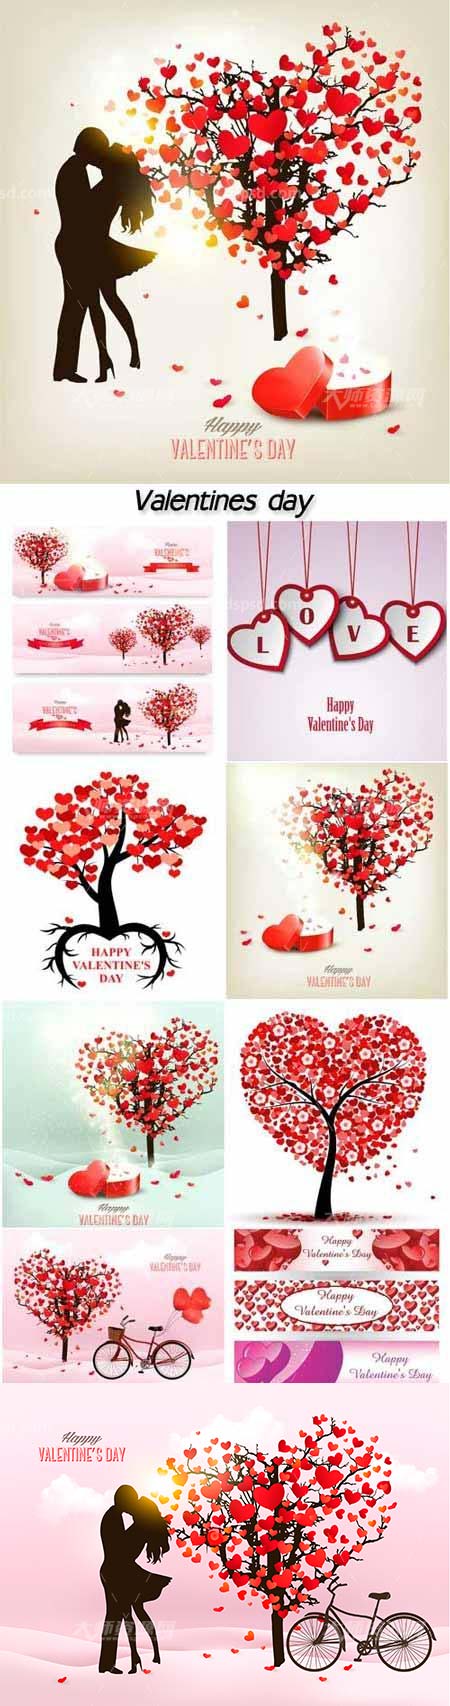 Holiday valentine day background with tree and romance silhouette,10个情人节专用矢量素材